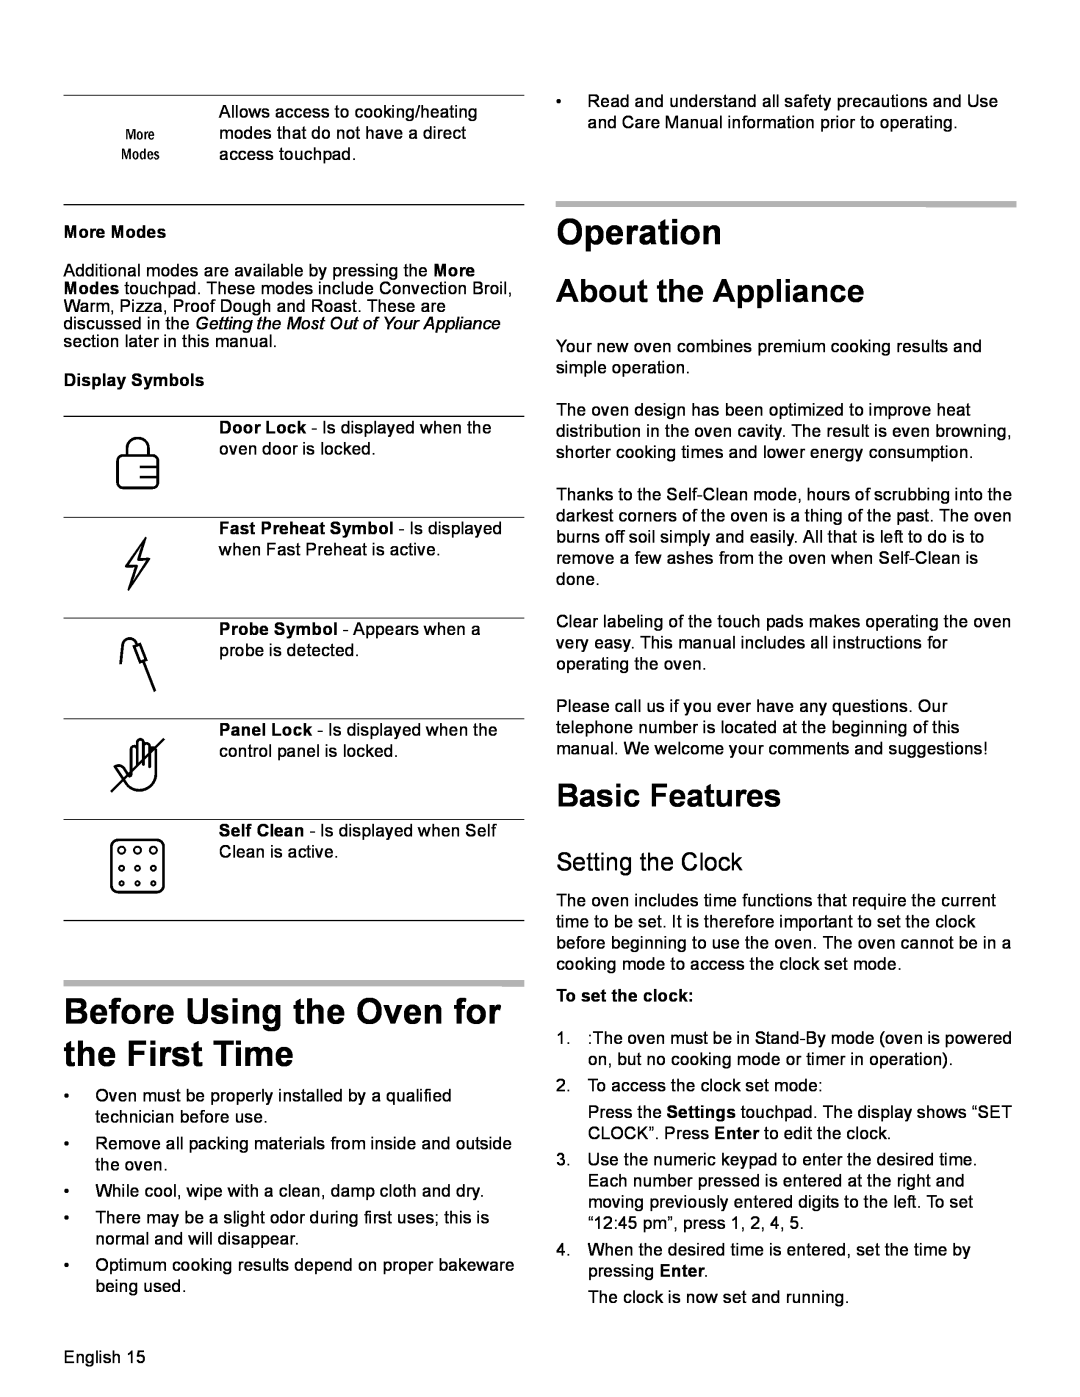 Bosch Appliances HDI8054U manual Before Using the Oven for the First Time, Operation, About the Appliance, Basic Features 